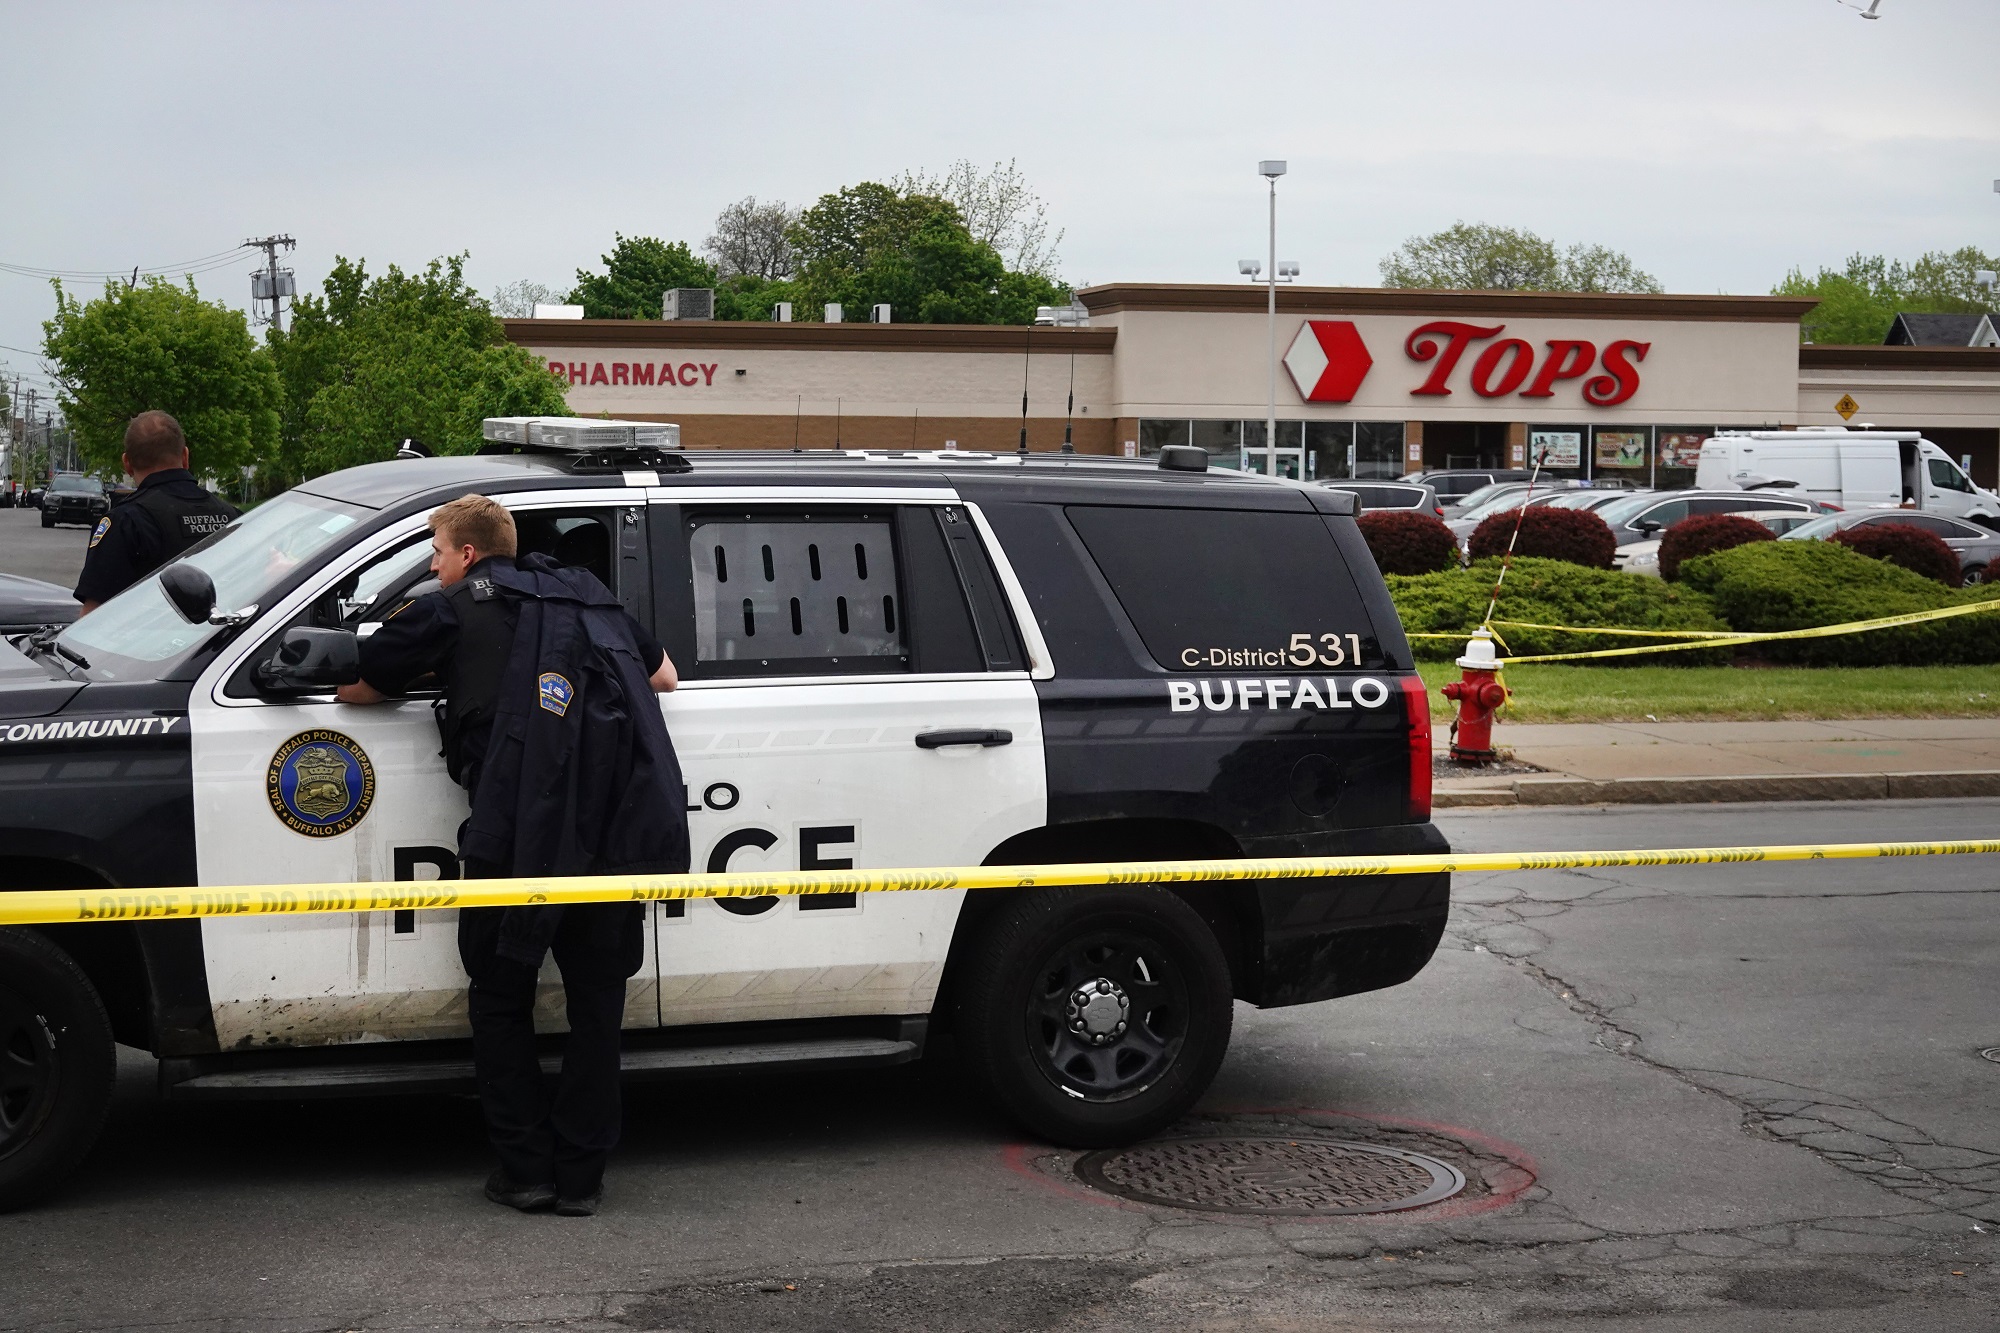 Buffalo, N.Y., shooter pleads guilty to supermarket shooting